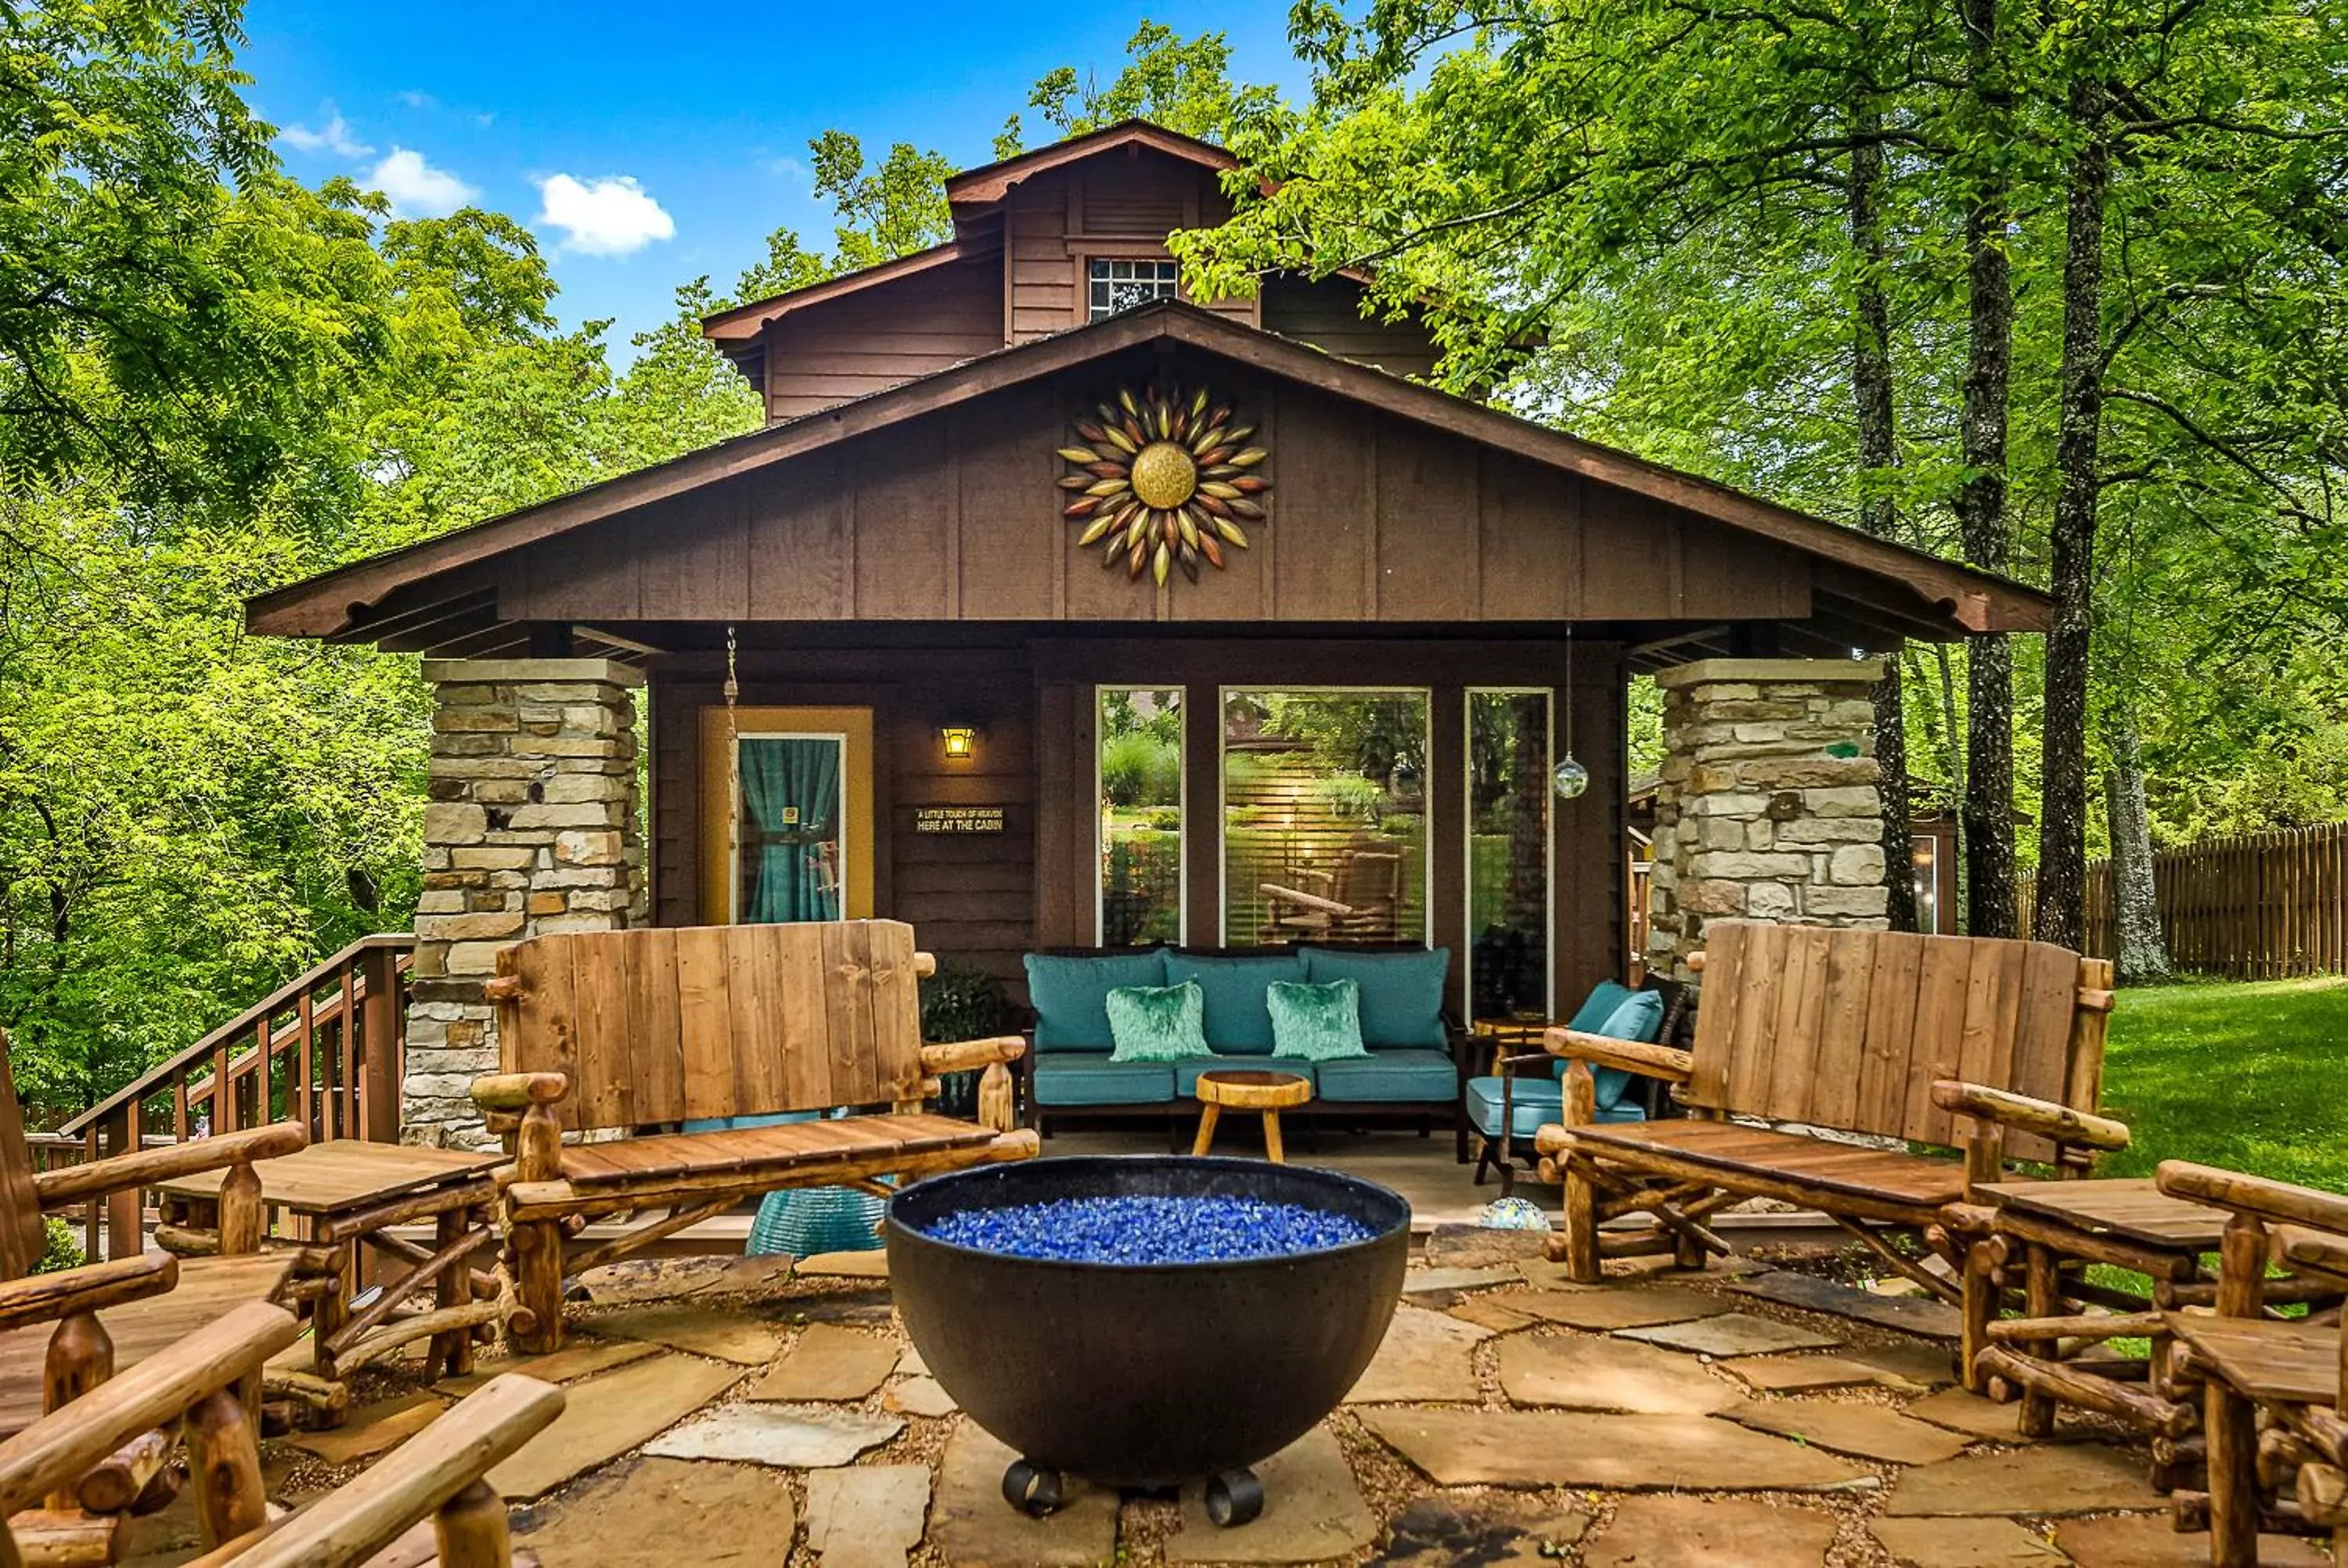 Patio in The Woods Cabins